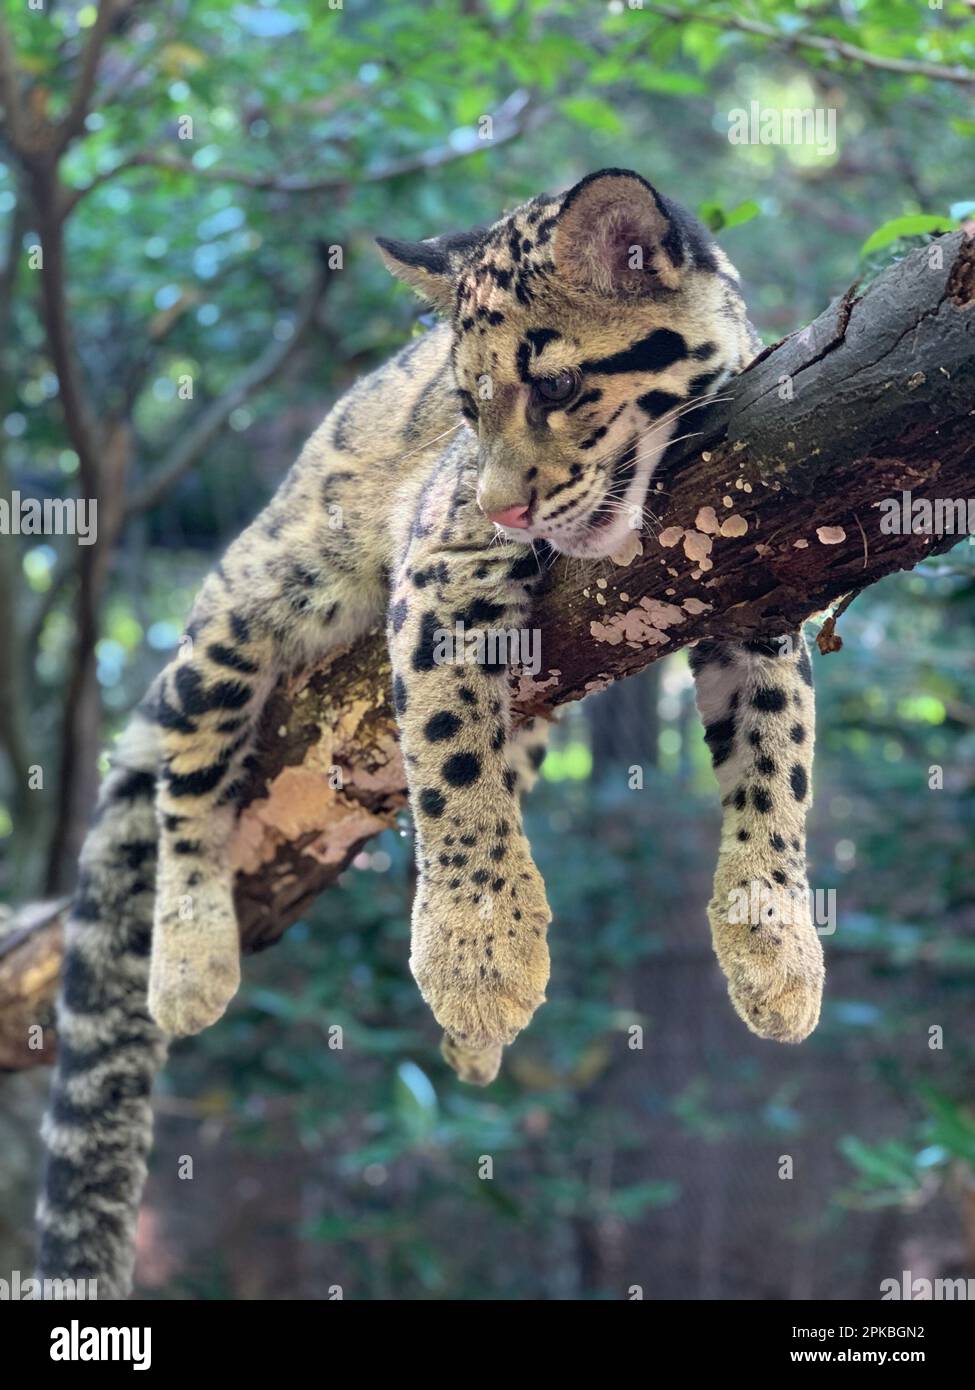 A Clouded Leopard cub resting in a tree, Smithsonian National Zoological Park, Washington, DC, USA Stock Photo